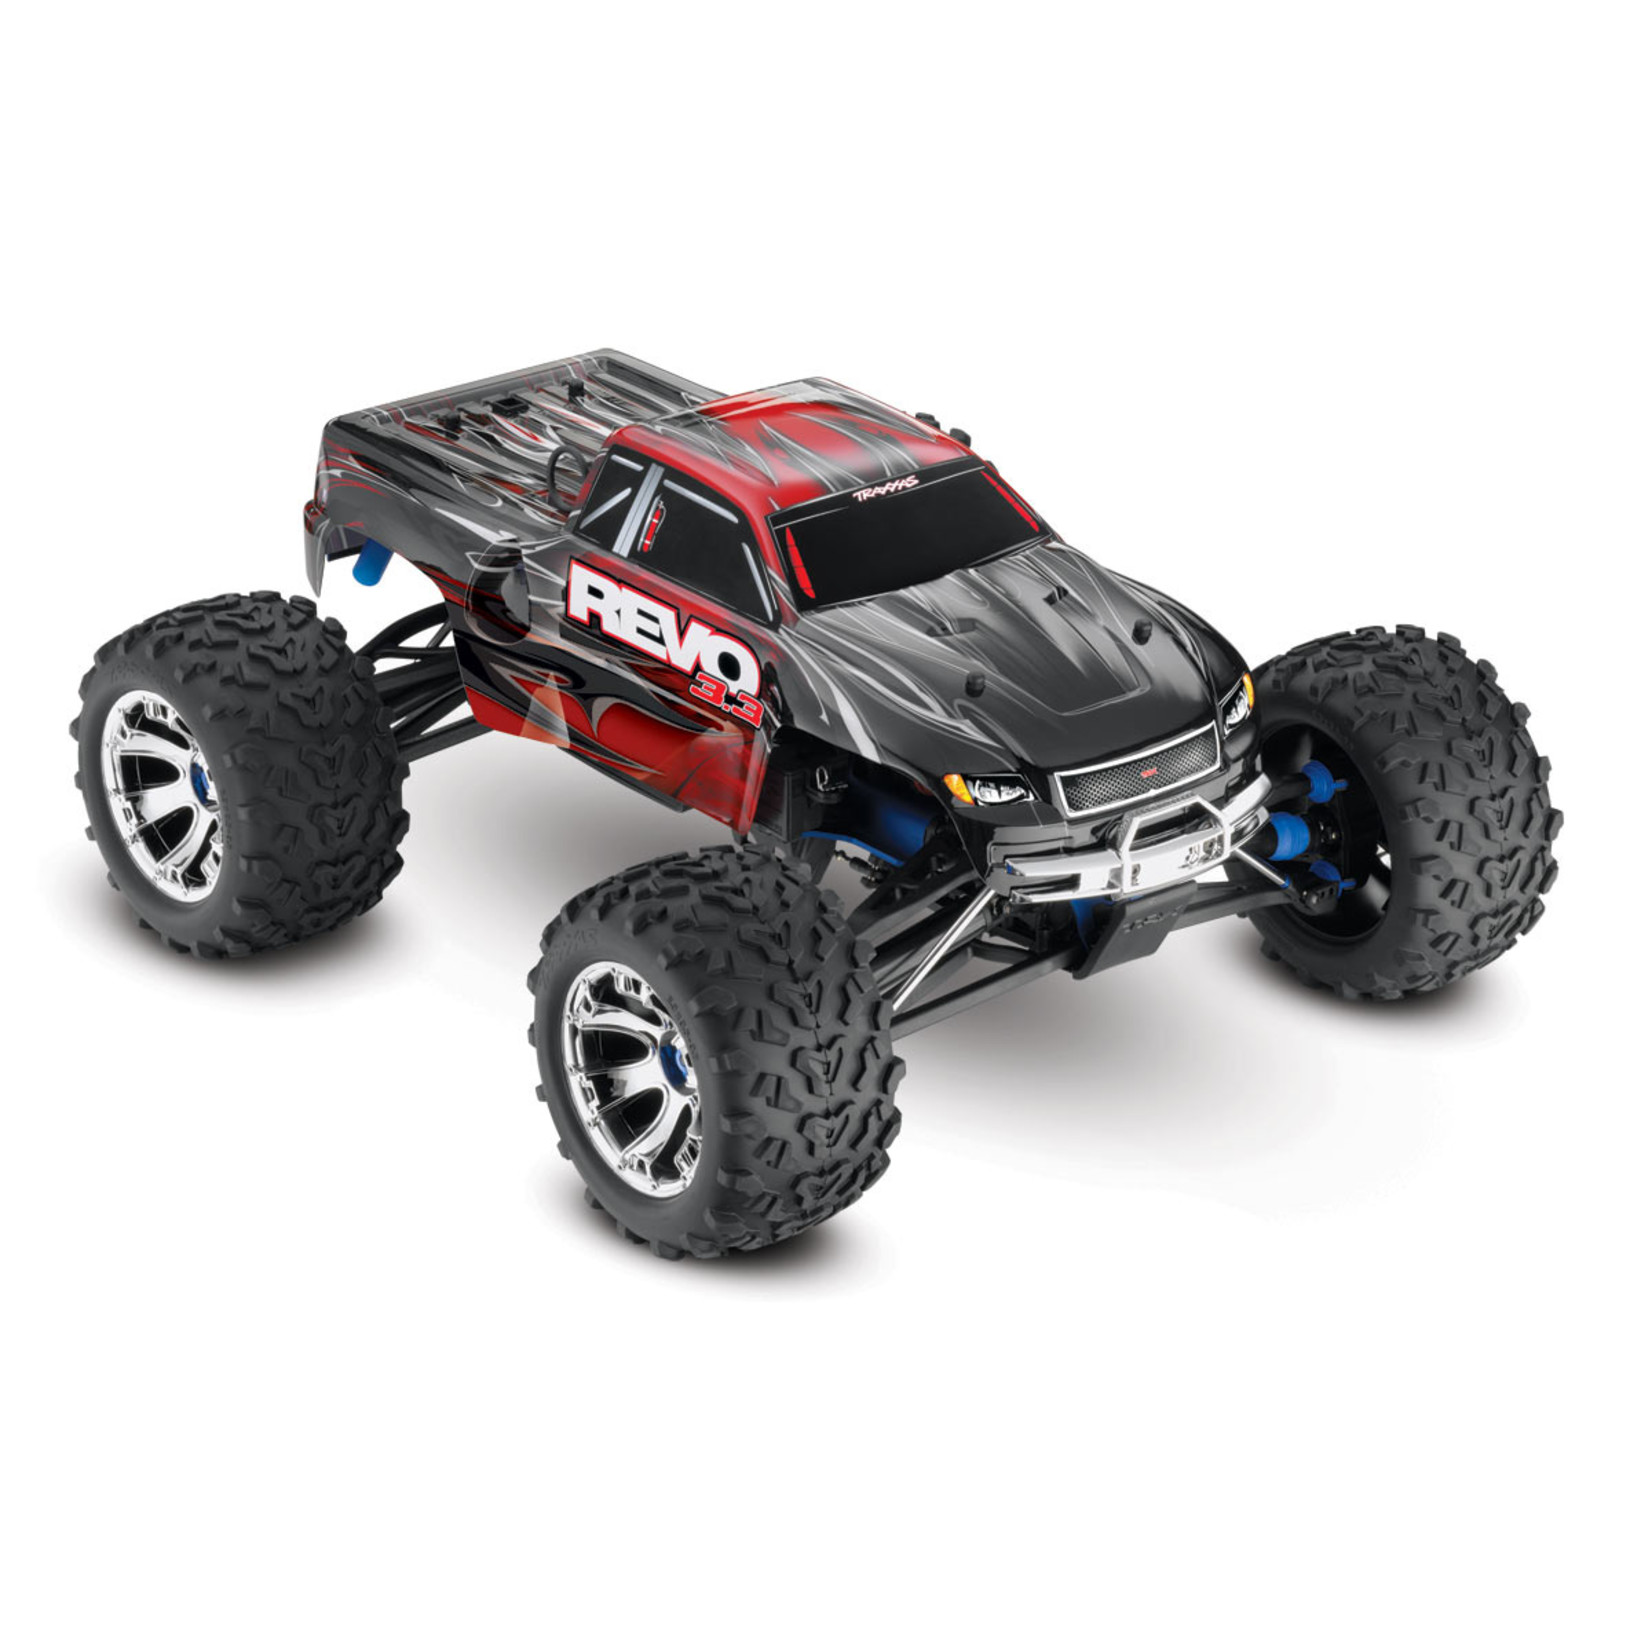 Desarmado tipo donante Revo 3.3: 1/10 Scale 4WD Nitro-Powered Monster Truck (with Telemetry  Sensors) with TQi 2.4GHz Radio System, Traxxas Link Wireless Module, and  Traxxas Stability Management (TSM) - RC Hobby Shop